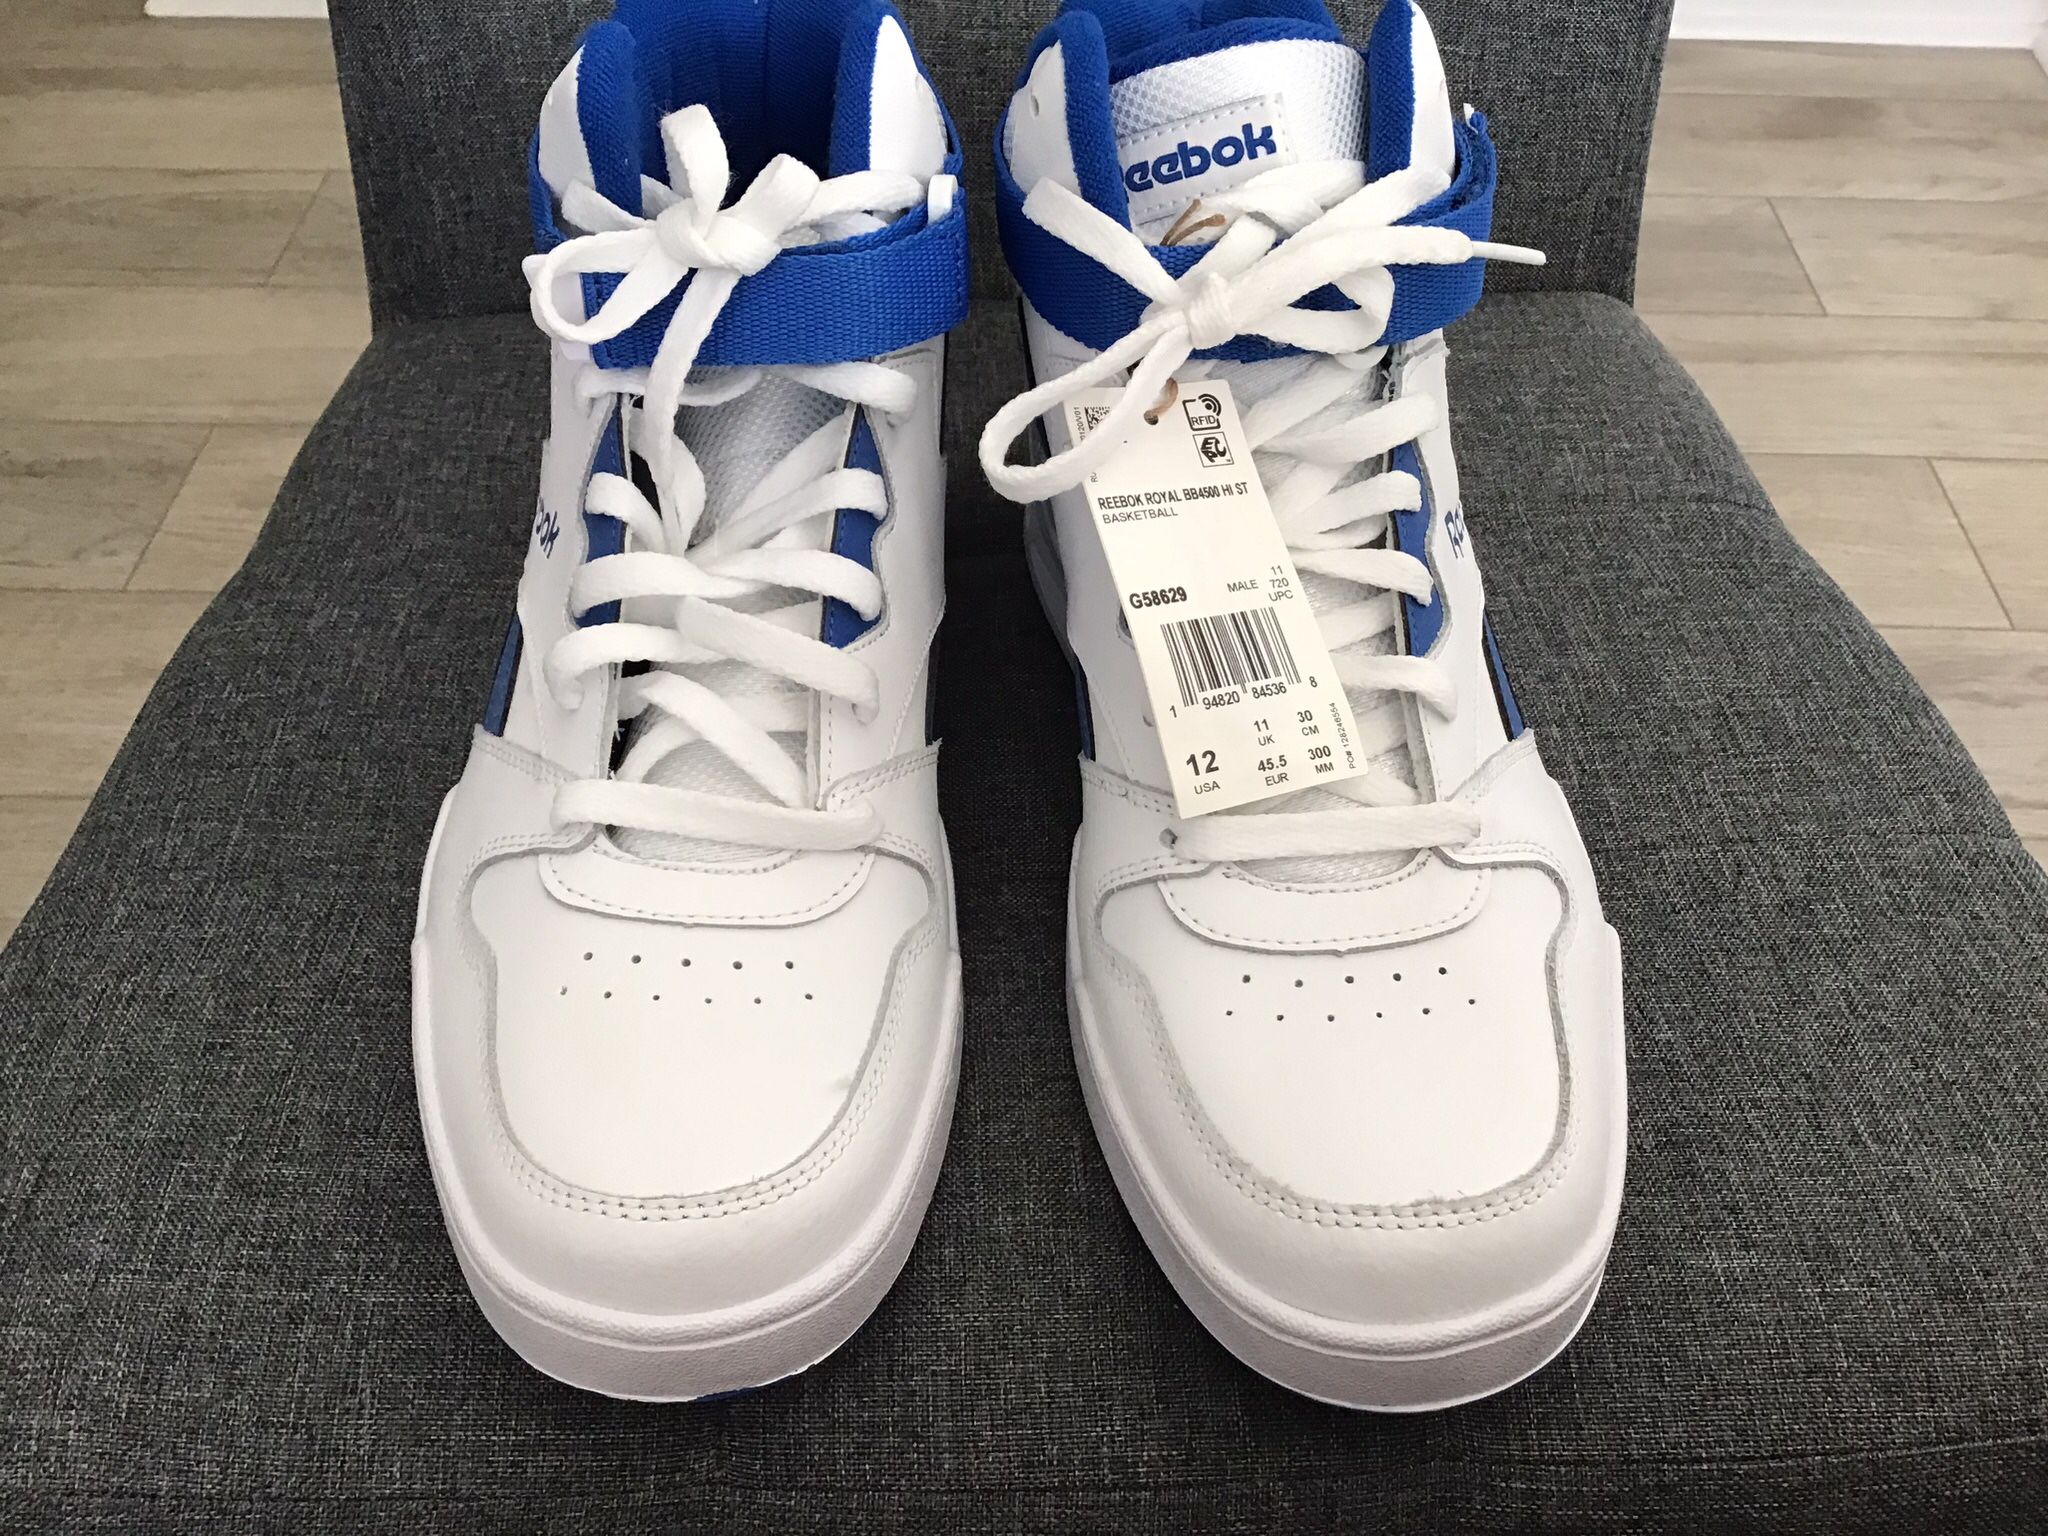 NEW~Authentic~Reebok Royal Bb4500~HiStrap White Vector Blue/White Sneakers/ Shoes~G58629~Size 12